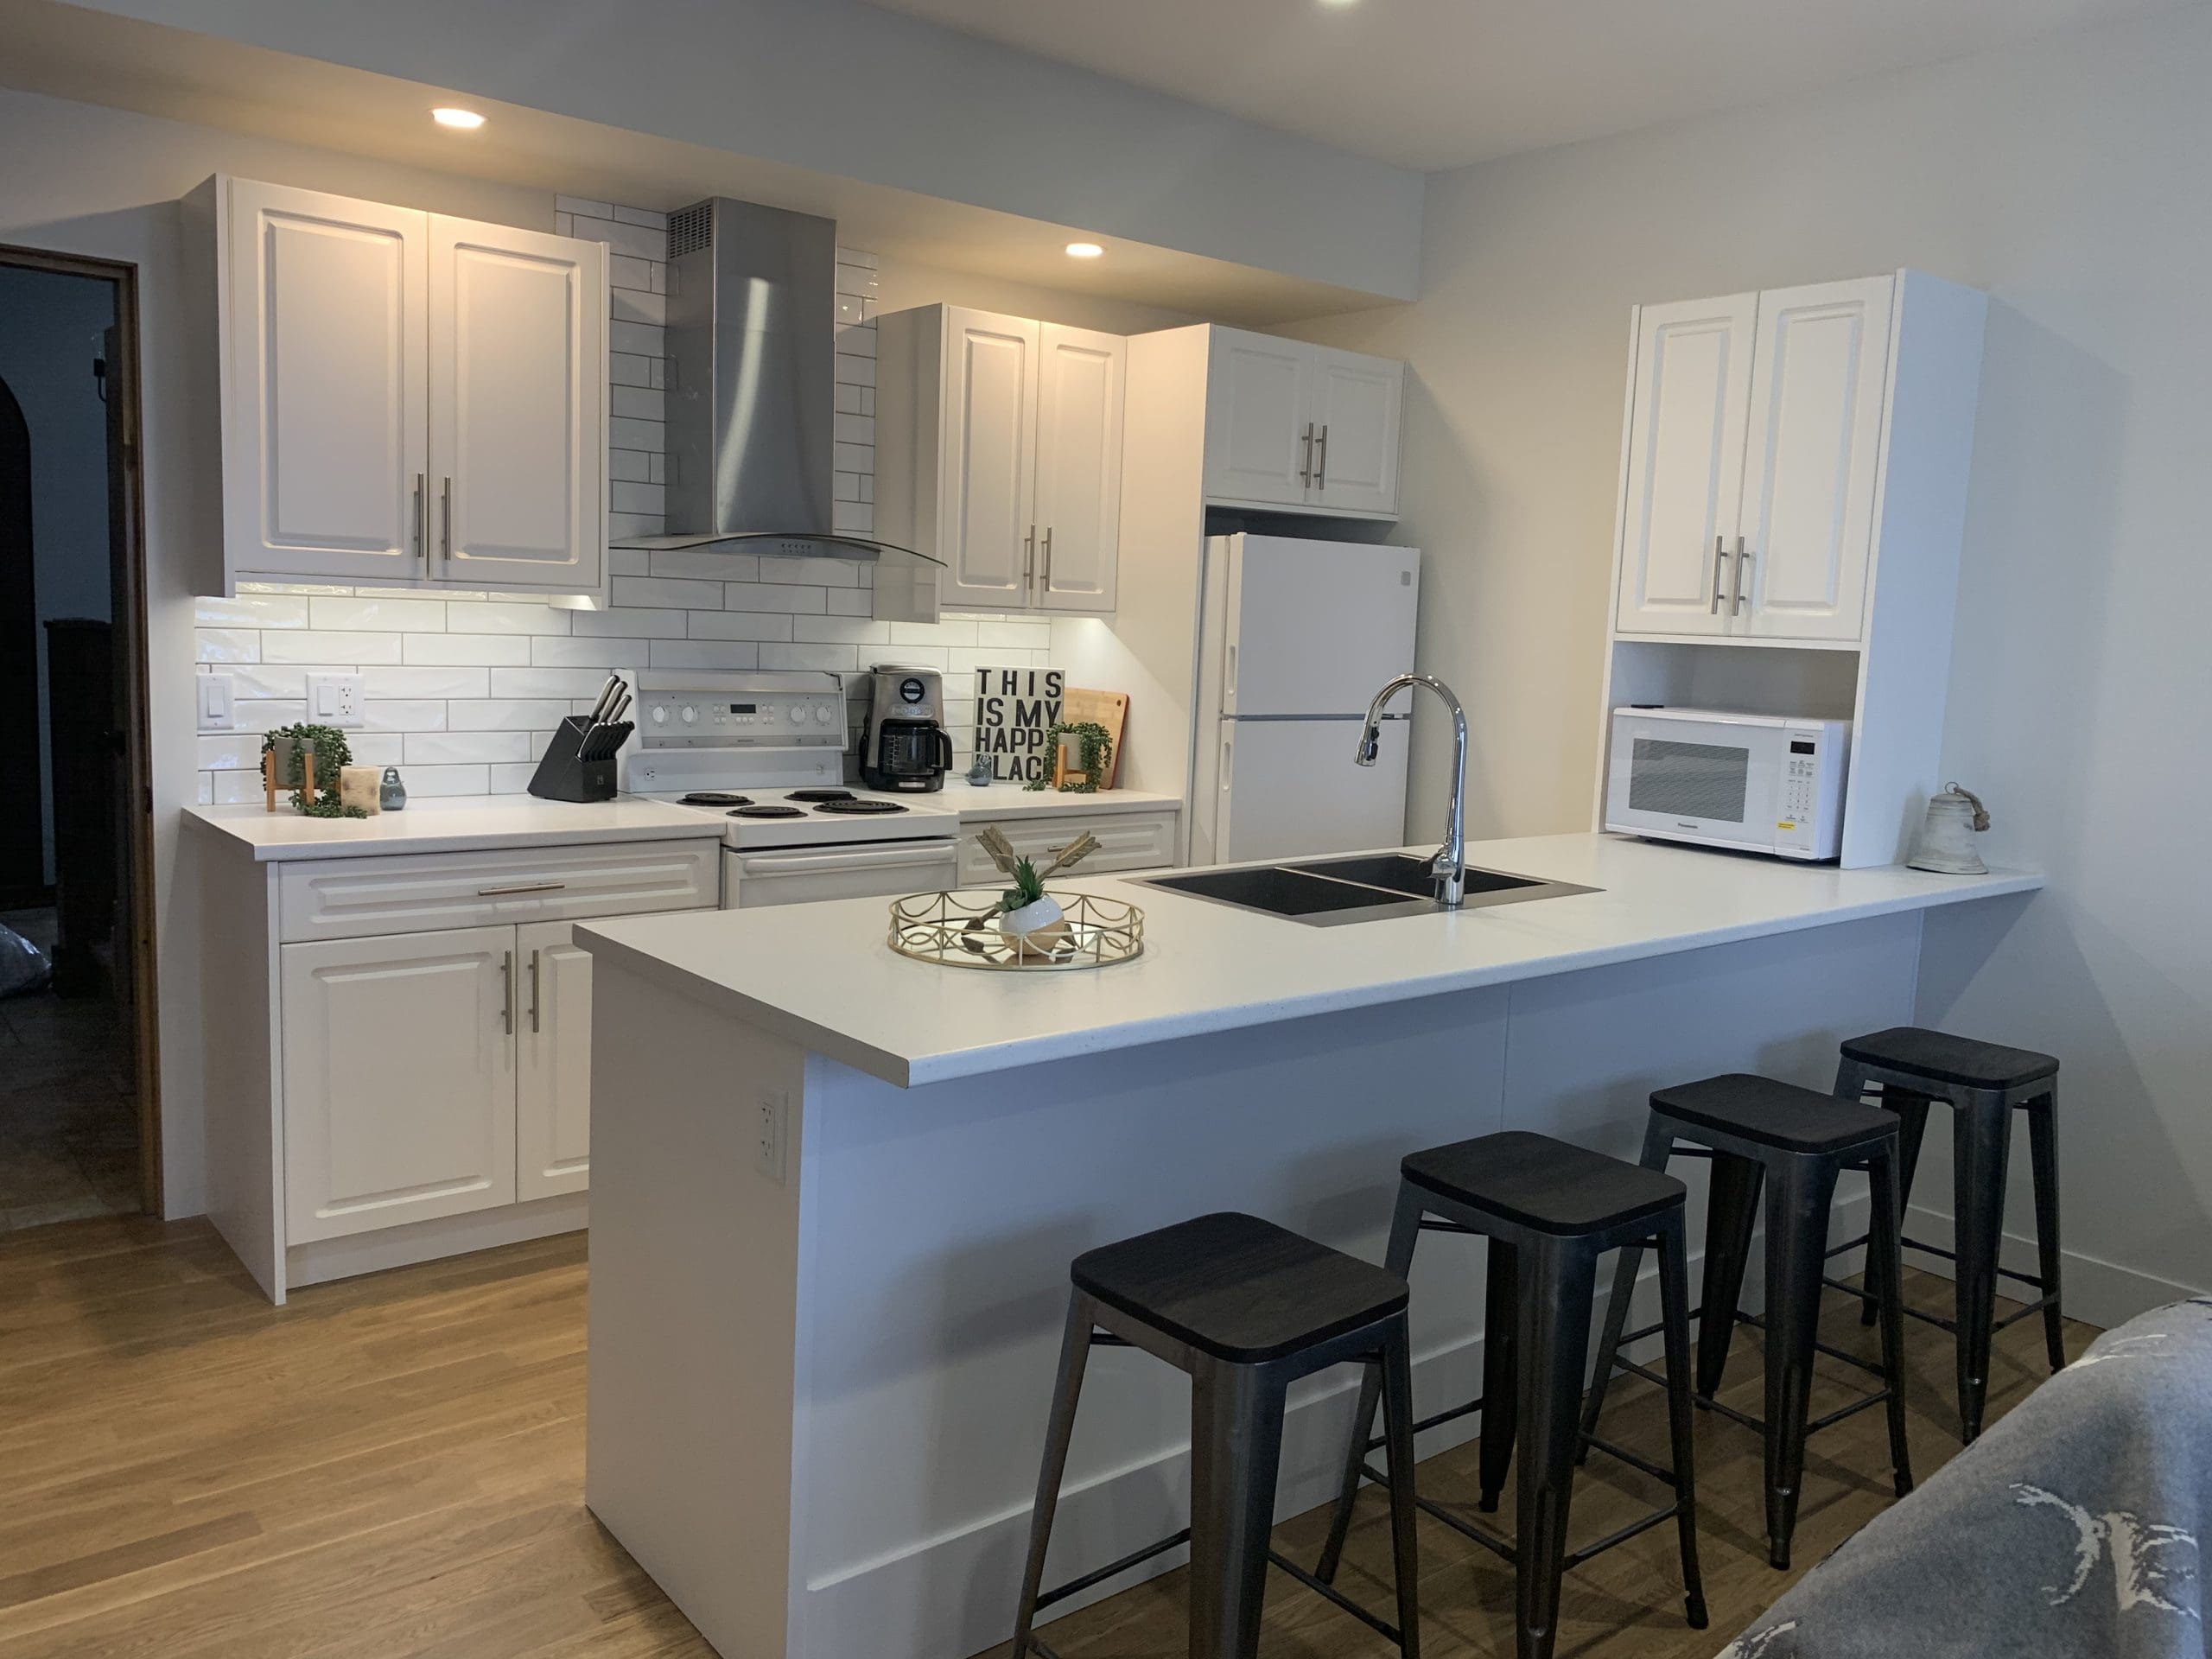 Suite Kitchen and breakfast bar. Modern appliances, open concept, bright private suite. Private hot tub, laundry, and everything you need for a couples or small family getaway.